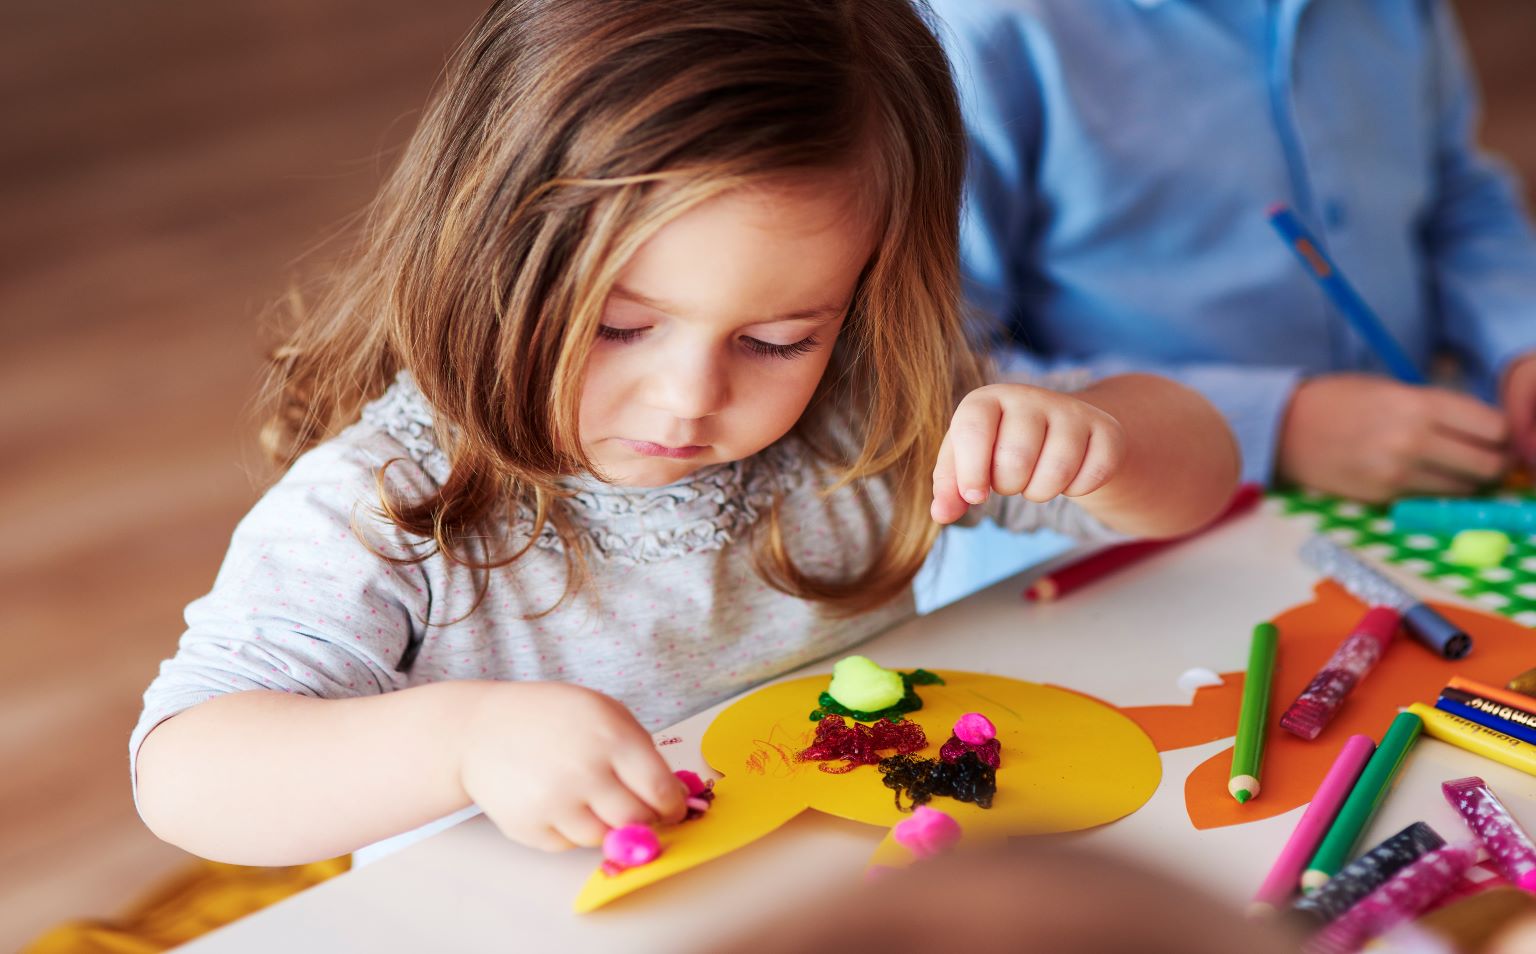 A young girl with blonde hair and wearing a grey t shirt is doing Easter craft, sticking shapes to a yellow paper rabbit.